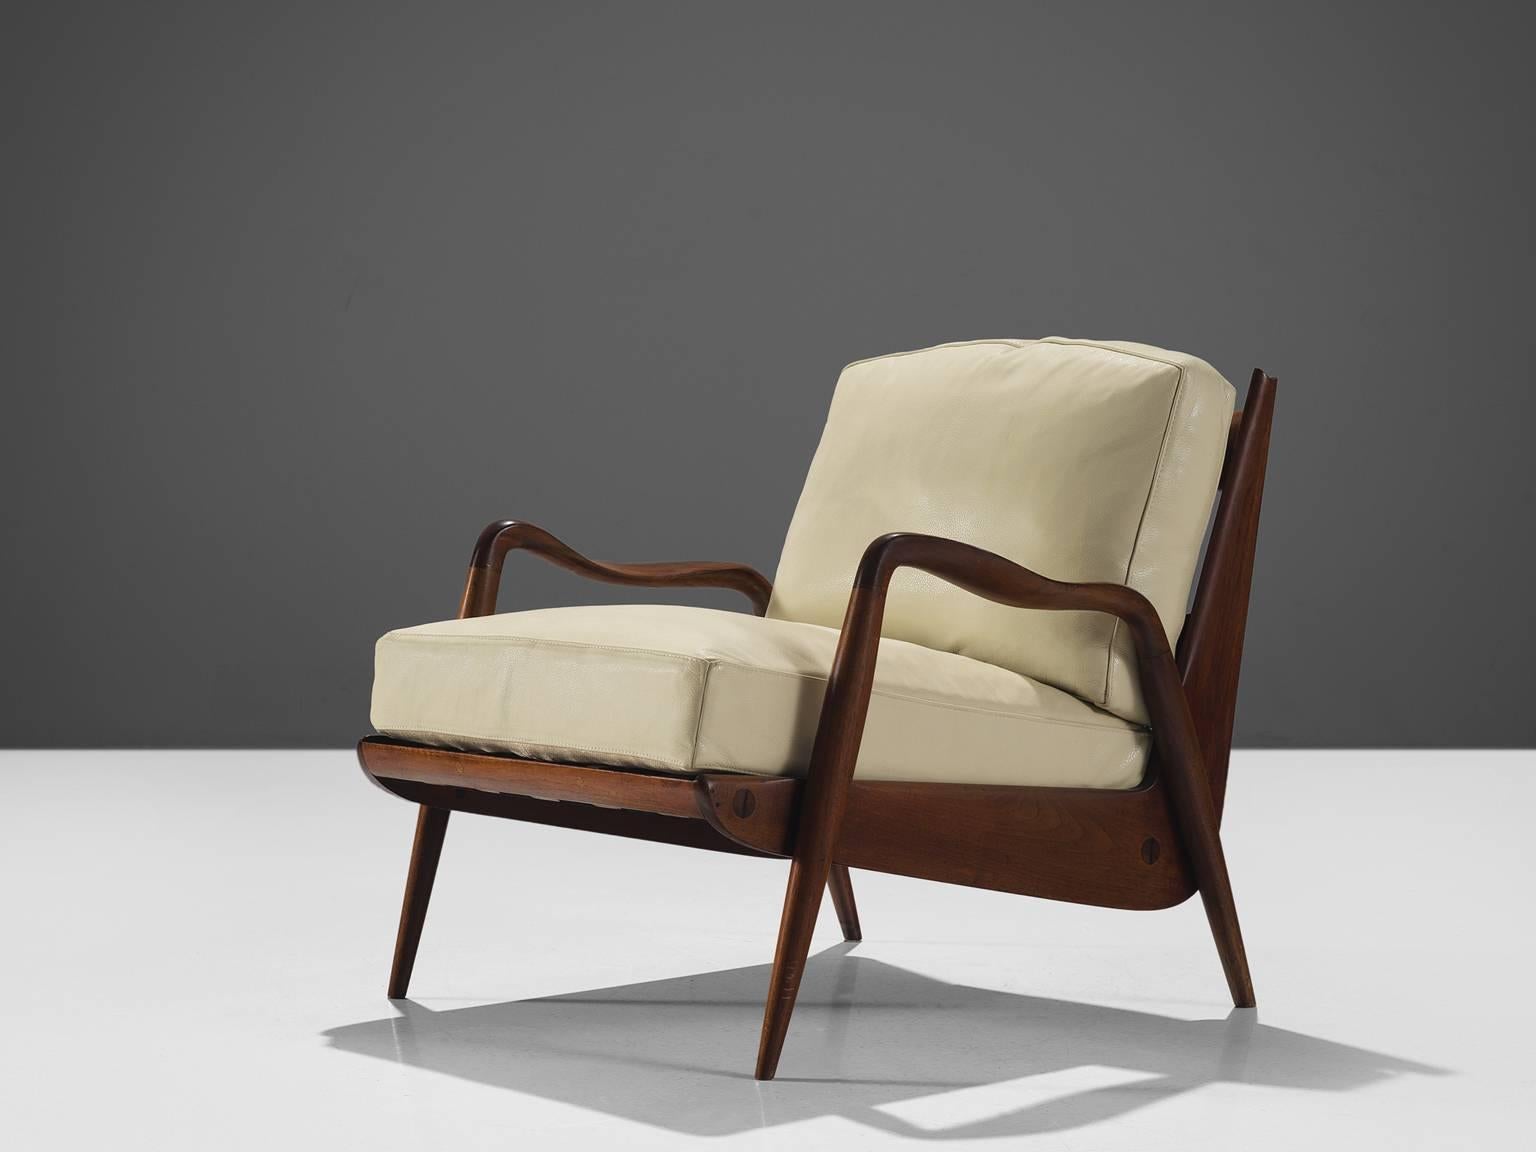 Philip Lloyd Powell, American walnut and beige to white leather, United States, 1960s. 

This sculptural armchair executed in American walnut and leather upholstery is designed by Philip Lloyd Powell. The name 'New Hope' is a reference to the